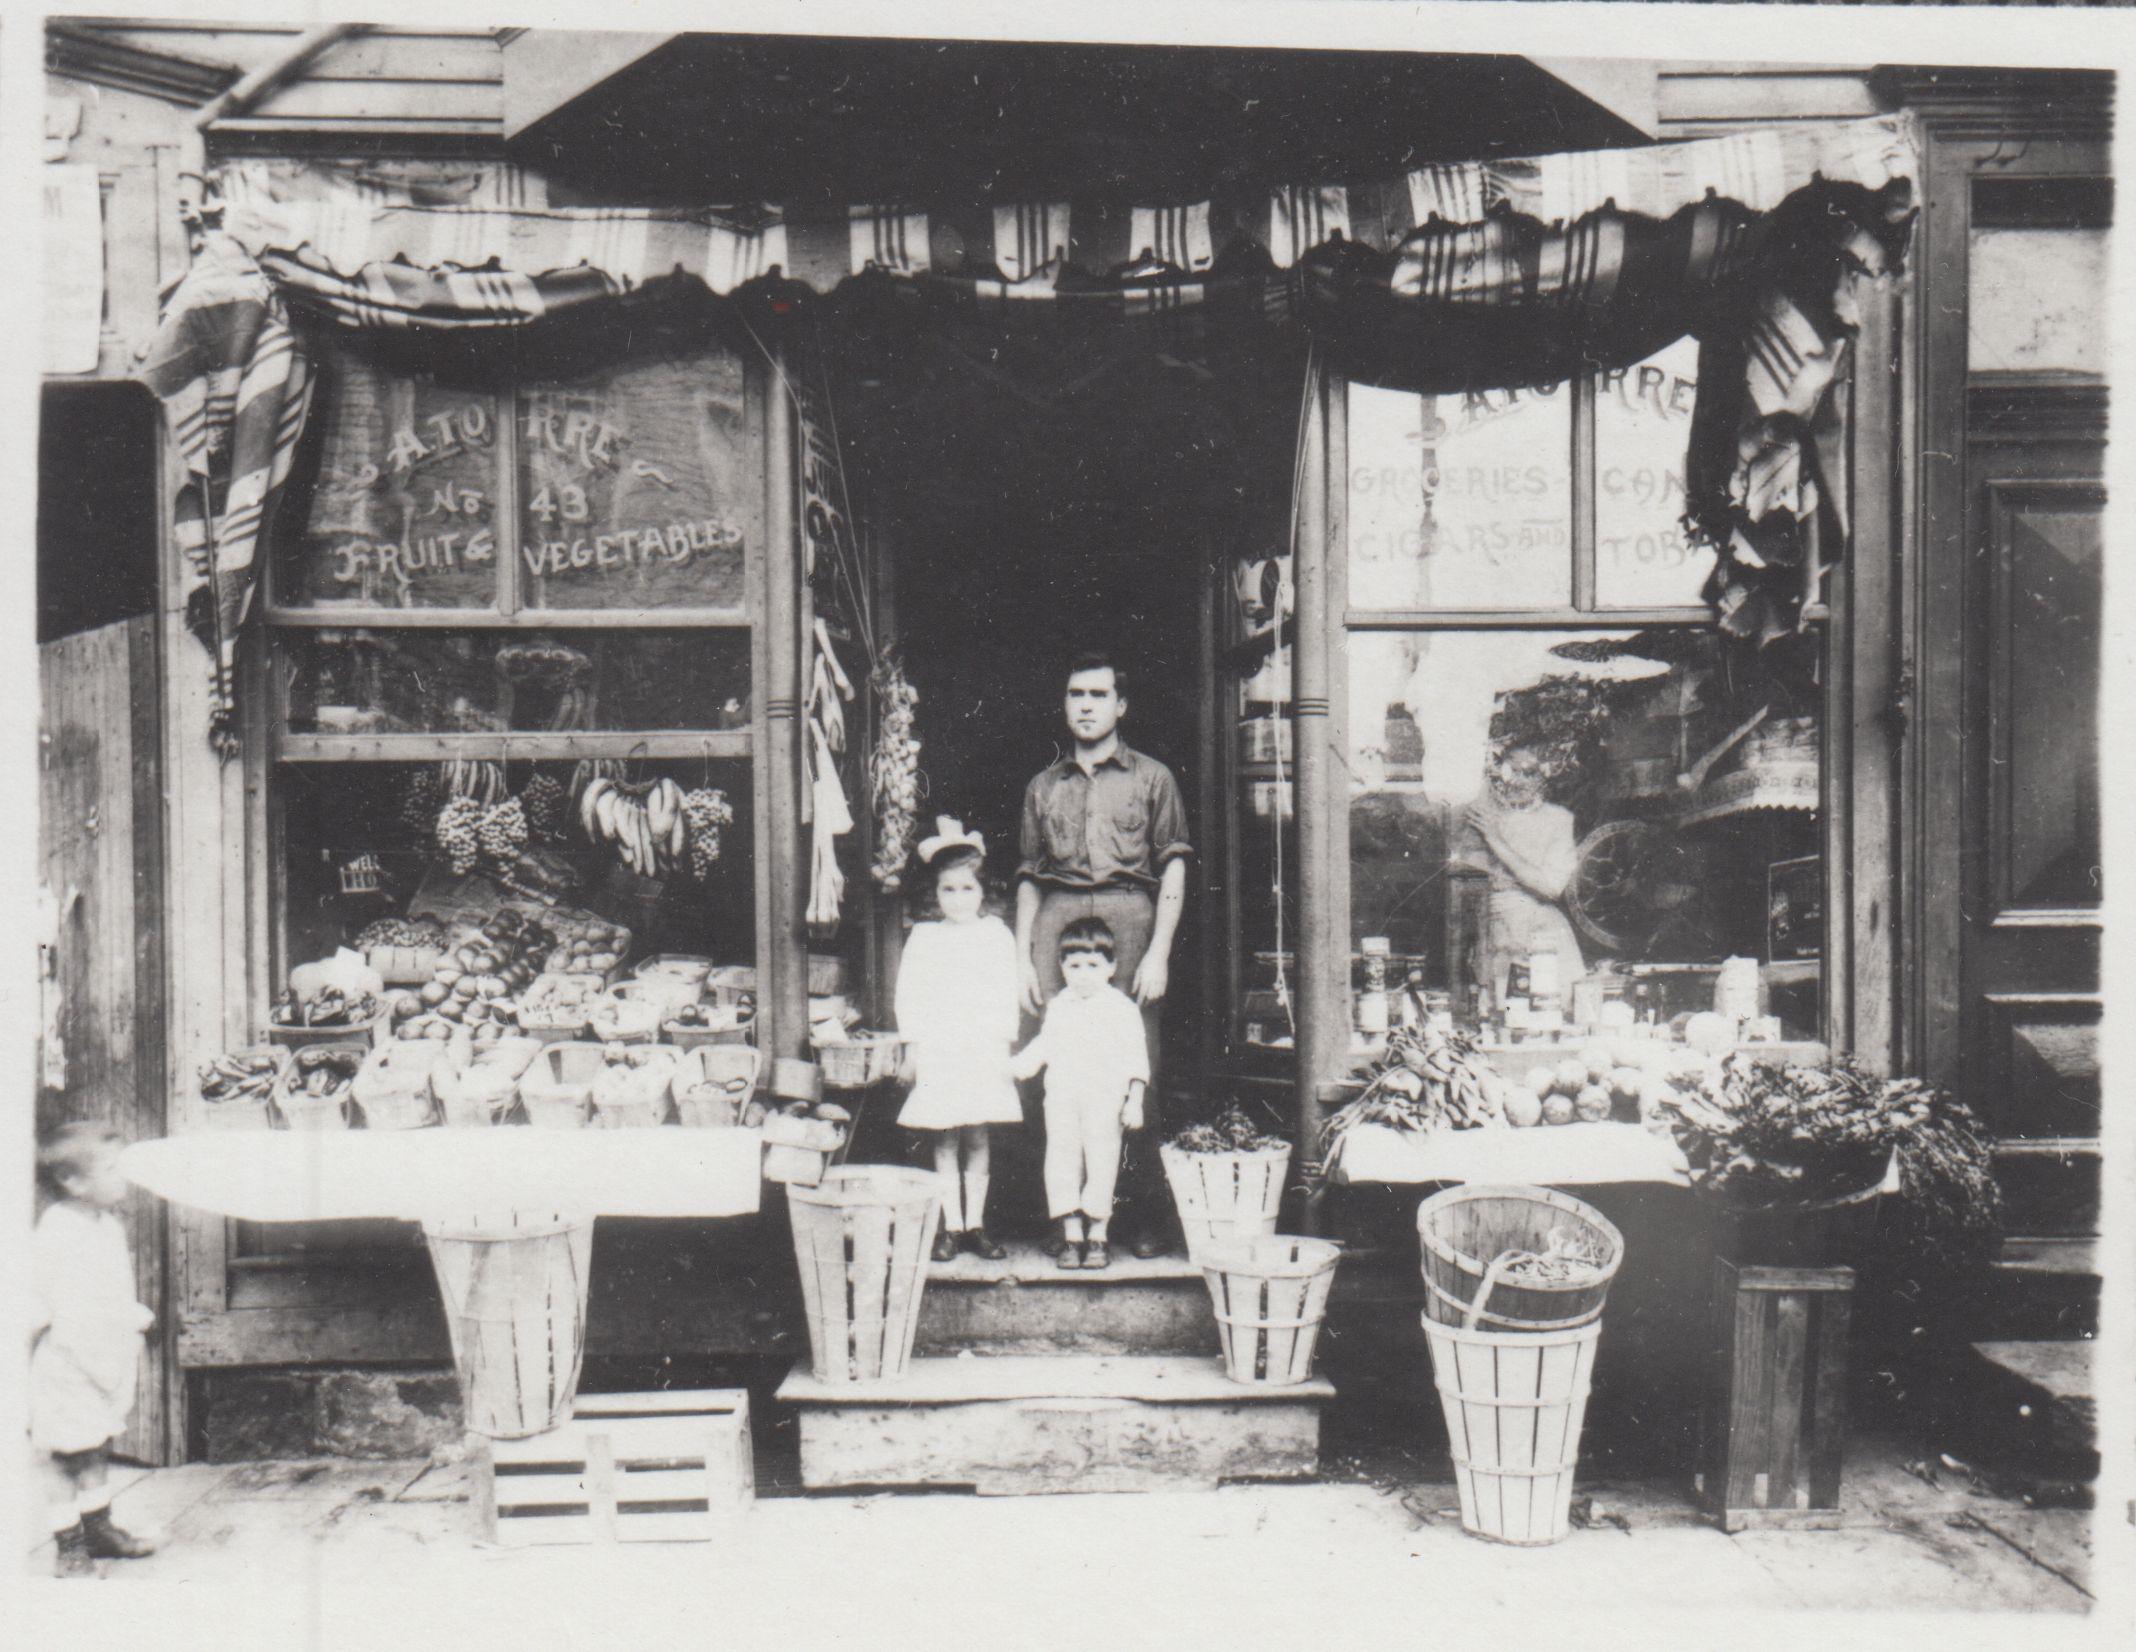 Photo Courtesy Center for Migration Studies, 1925 Al Torre and Family at their Fruit and Vegetable Stand in St Paternson, NJ